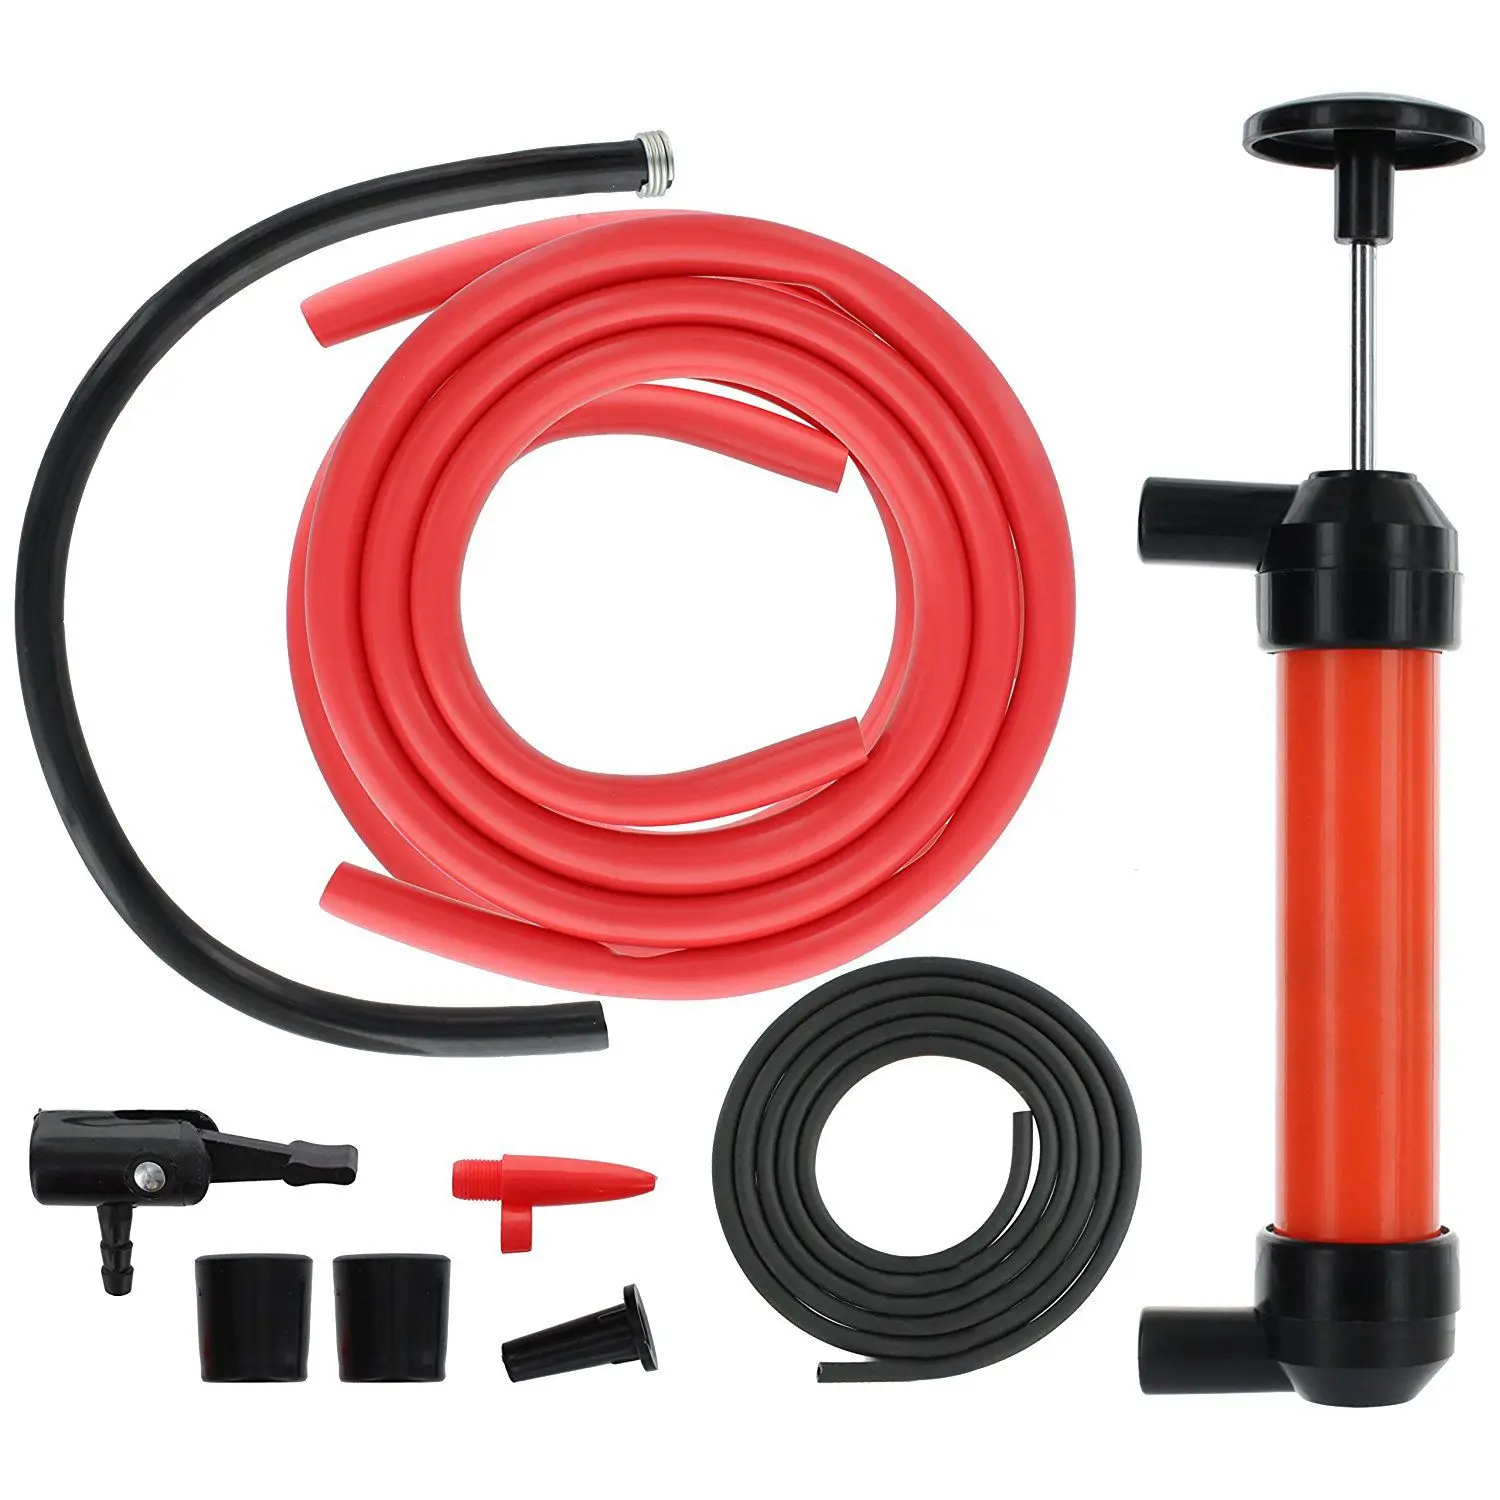 

Multi-Purpose Siphon Transfer Pump Kit, with Dipstick Tube | Fluid Fuel Extractor Suction Tool for Oil, Gasoline, Water, Liqui